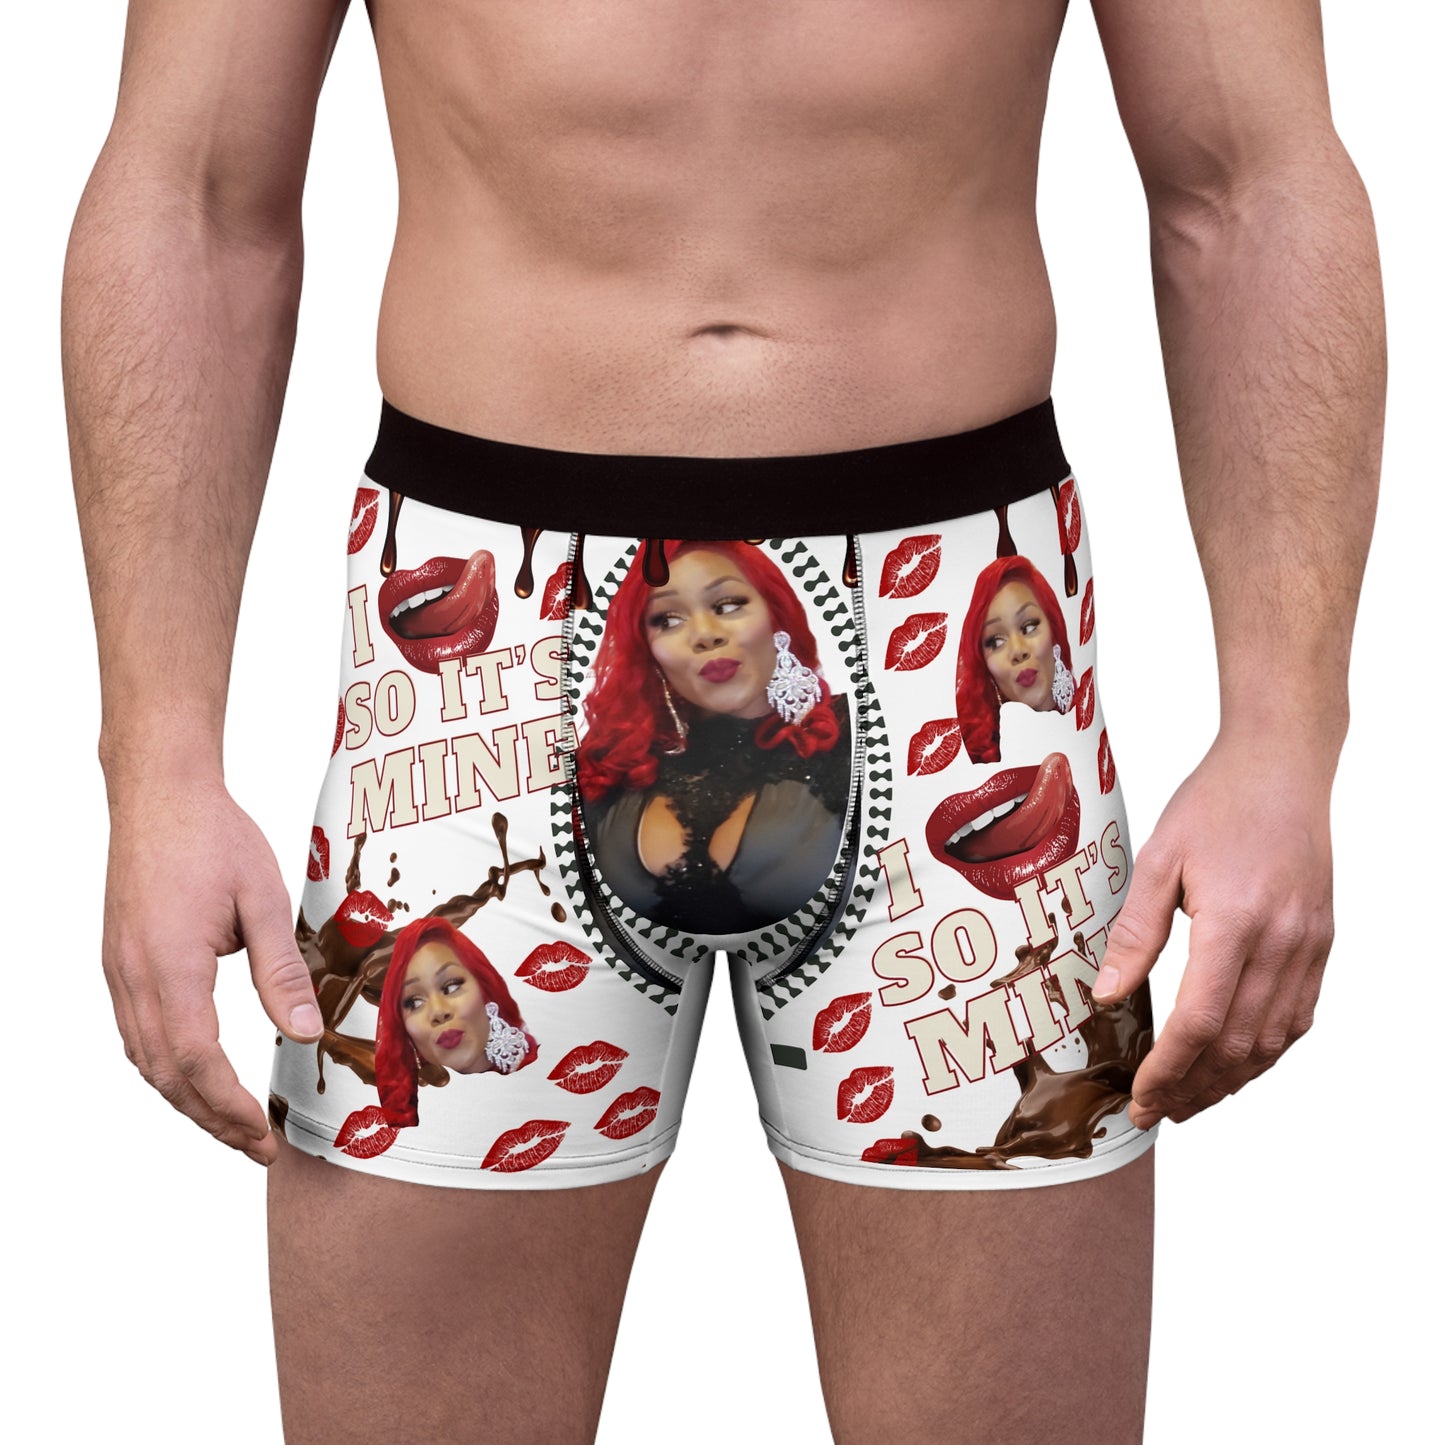 Personalized Face Boxers - "I licked it"